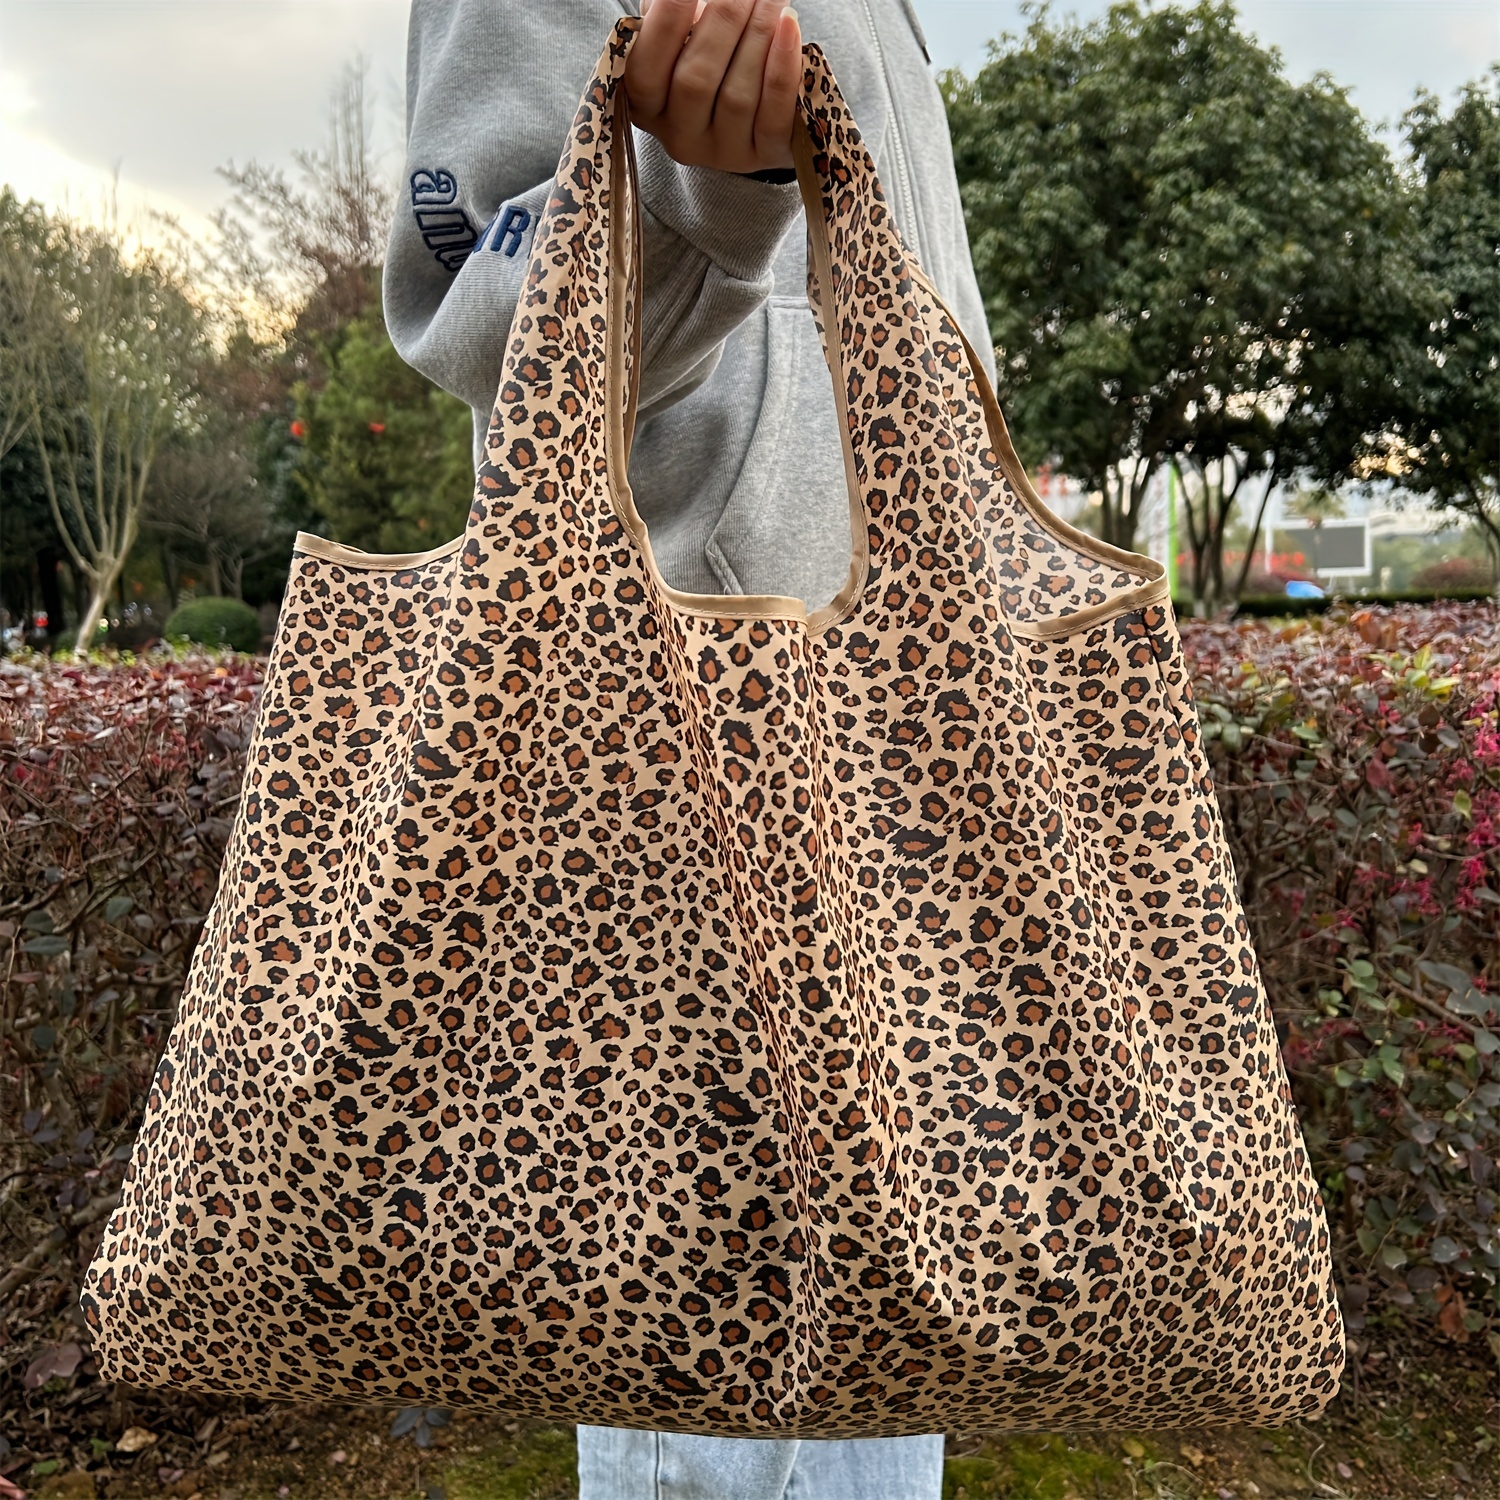 

Extra Large Capacity Tote Bag, Portable & Foldable Shopping Bag, Lightweight Bag With Leopard Print Design